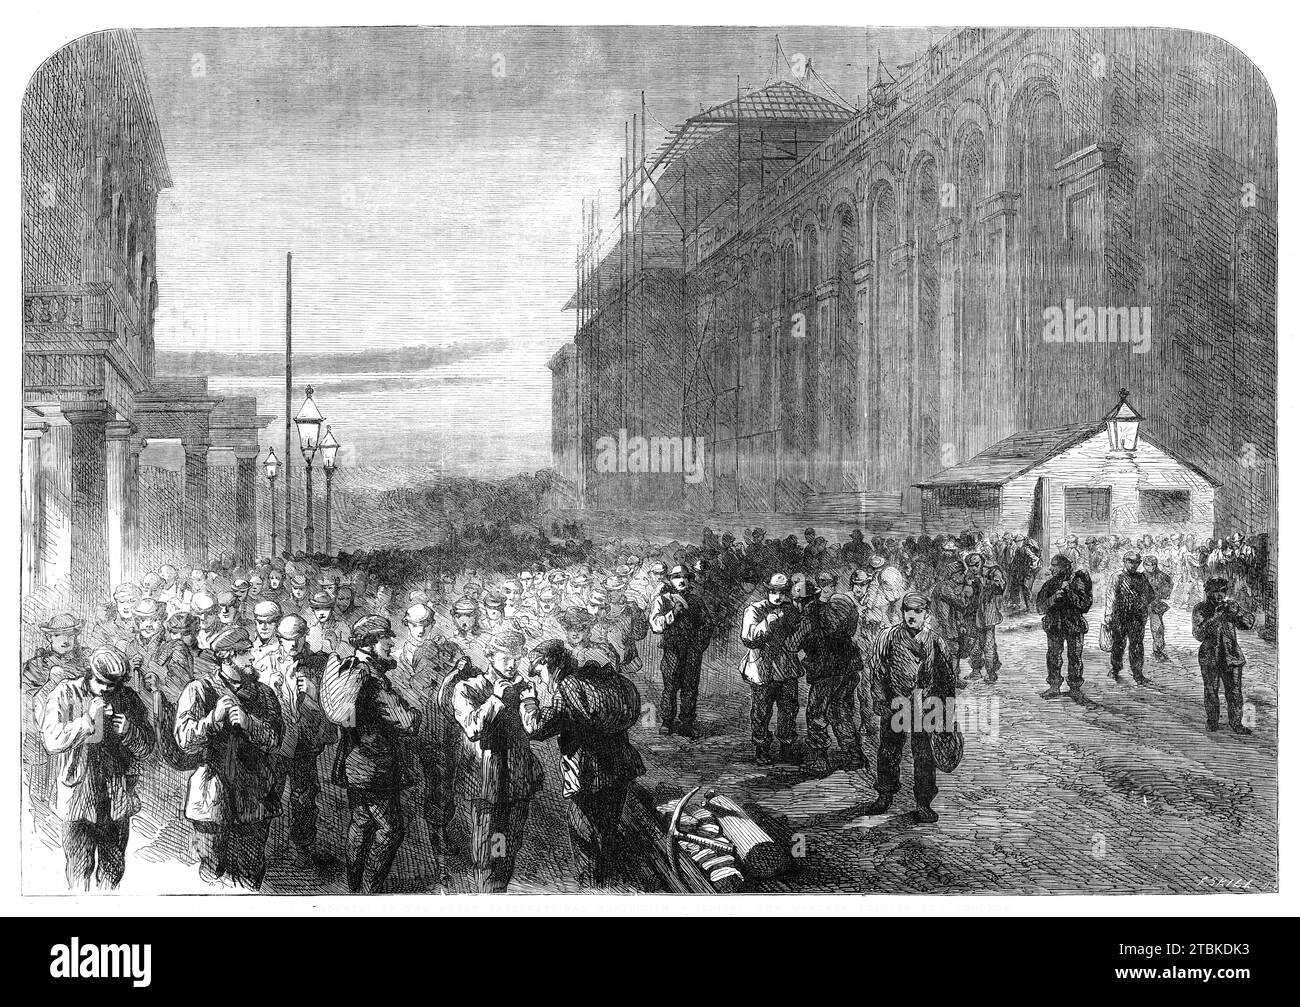 Progress of the Great International Exhibition building: the workmen leaving the grounds, [South Kensington, London], 1861. Our engraving represents a picturesque scene enough, which takes place in the closing gloom every evening - the workmen employed upon the building (in round numbers, some thousand) leaving the building and proceeding to their homes. Such a mass of human industry and intelligence was perhaps never before seen issuing from one field of labour of similar dimensions. The men employed upon this great work, we understand, are all picked men of their several classes; and, from a Stock Photo